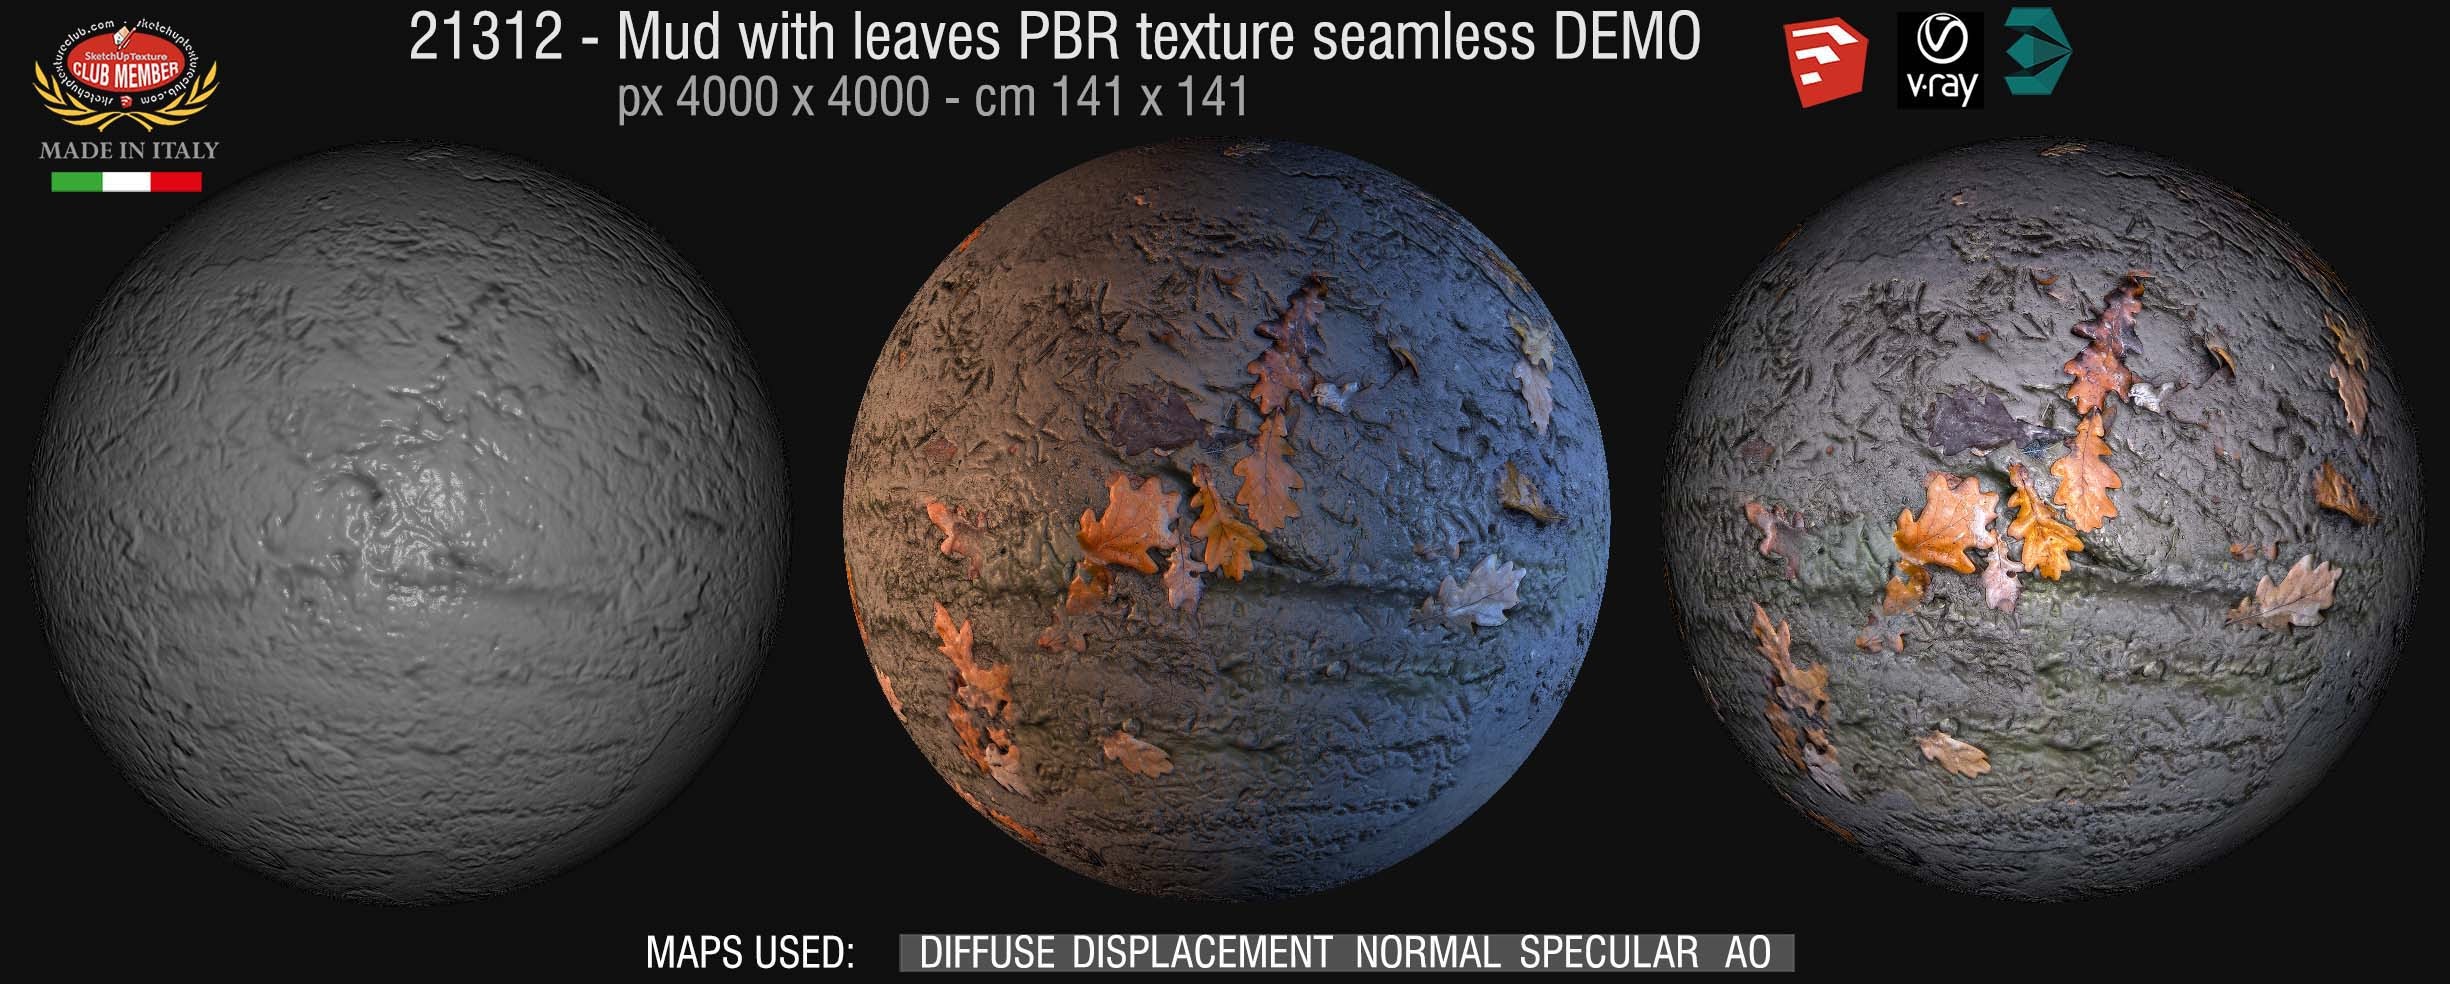 21312 Mud with leaves PBR texture seamless DEMO